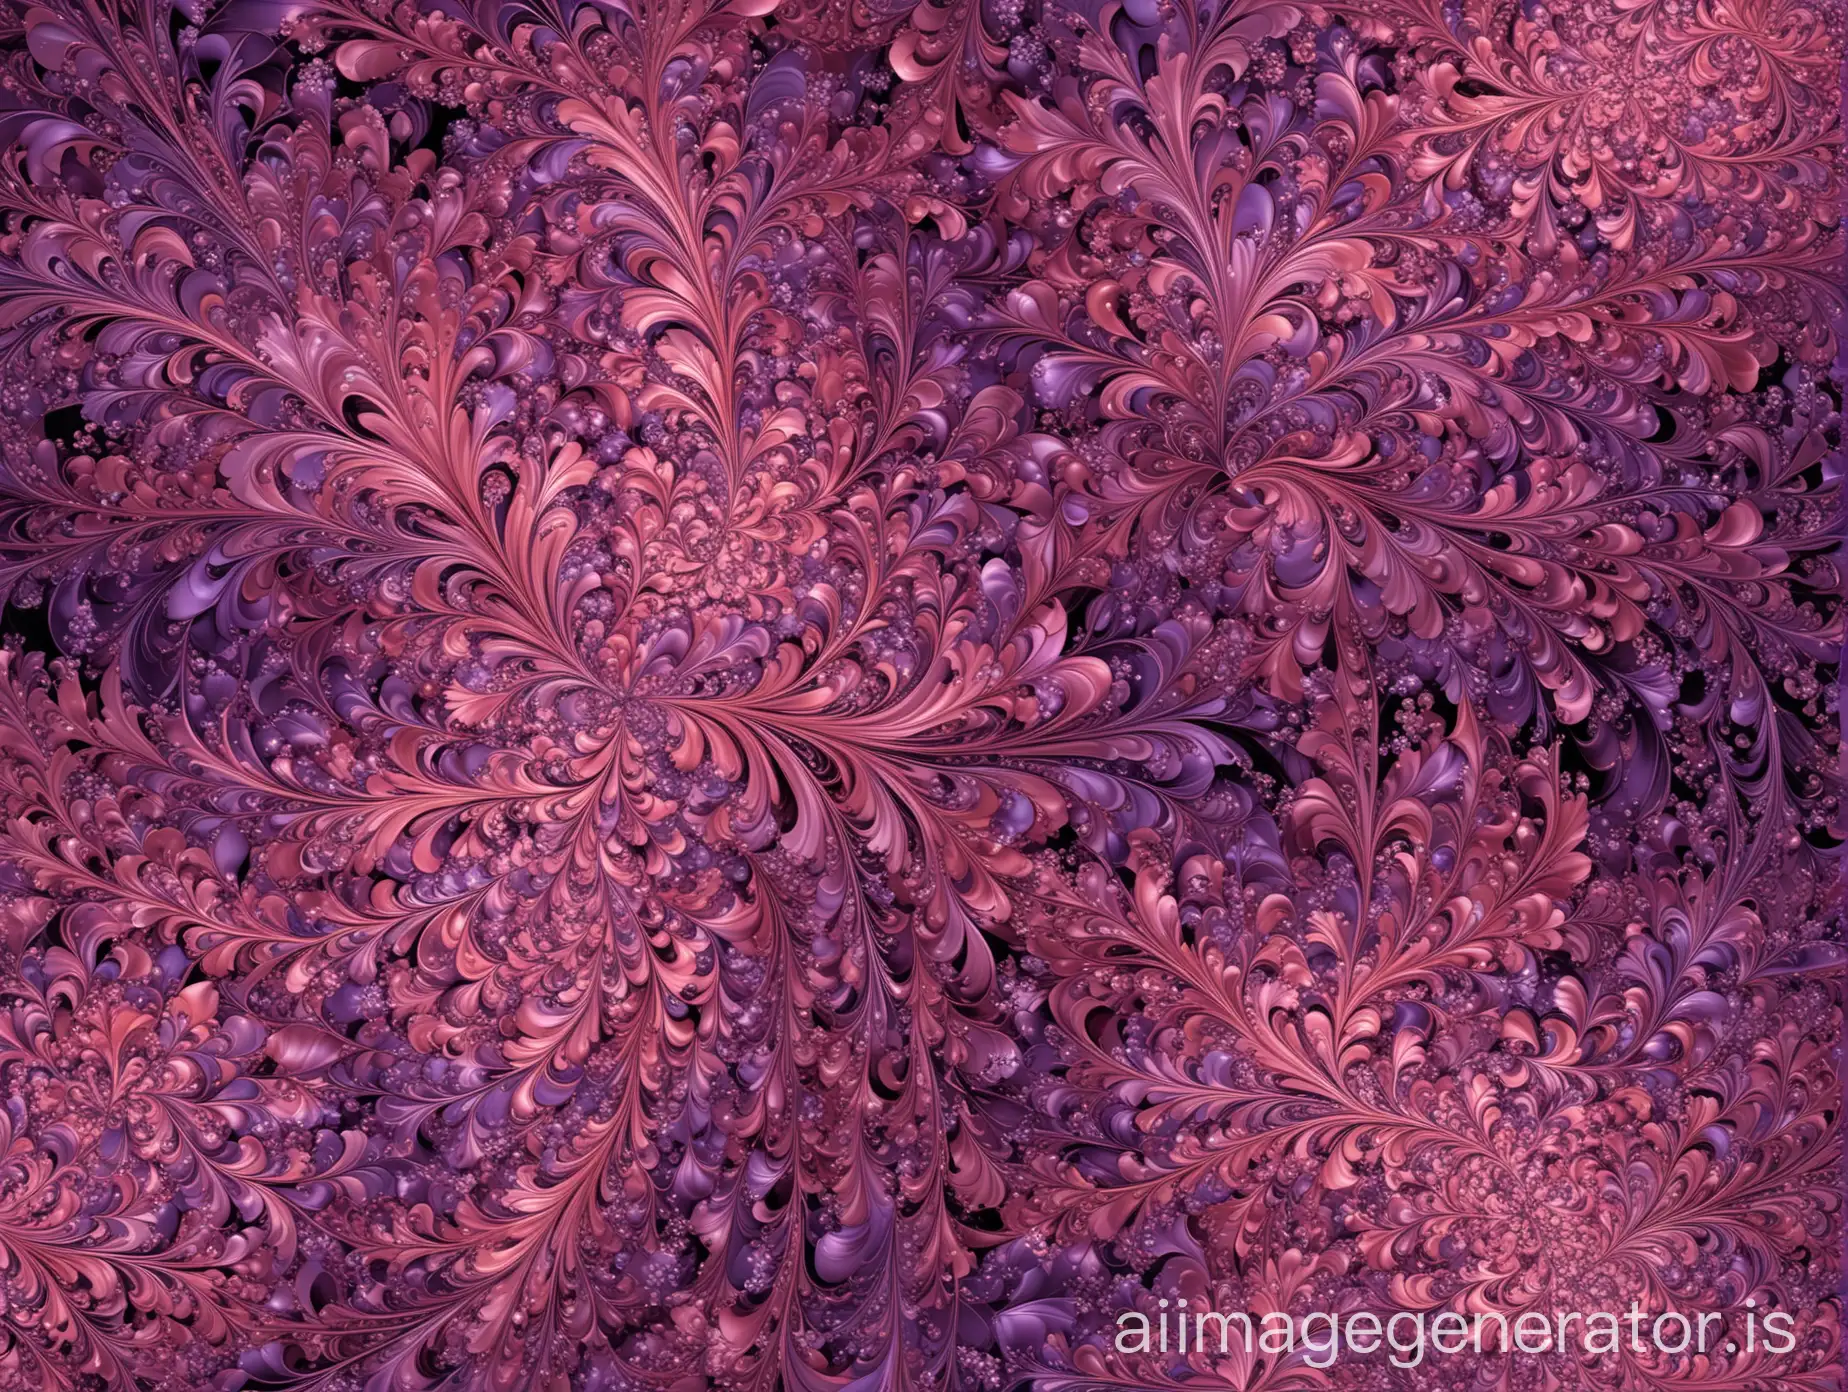 A mesmerizing fractal design featuring repeating patterns of pink and purple hues, created using digital rendering techniques